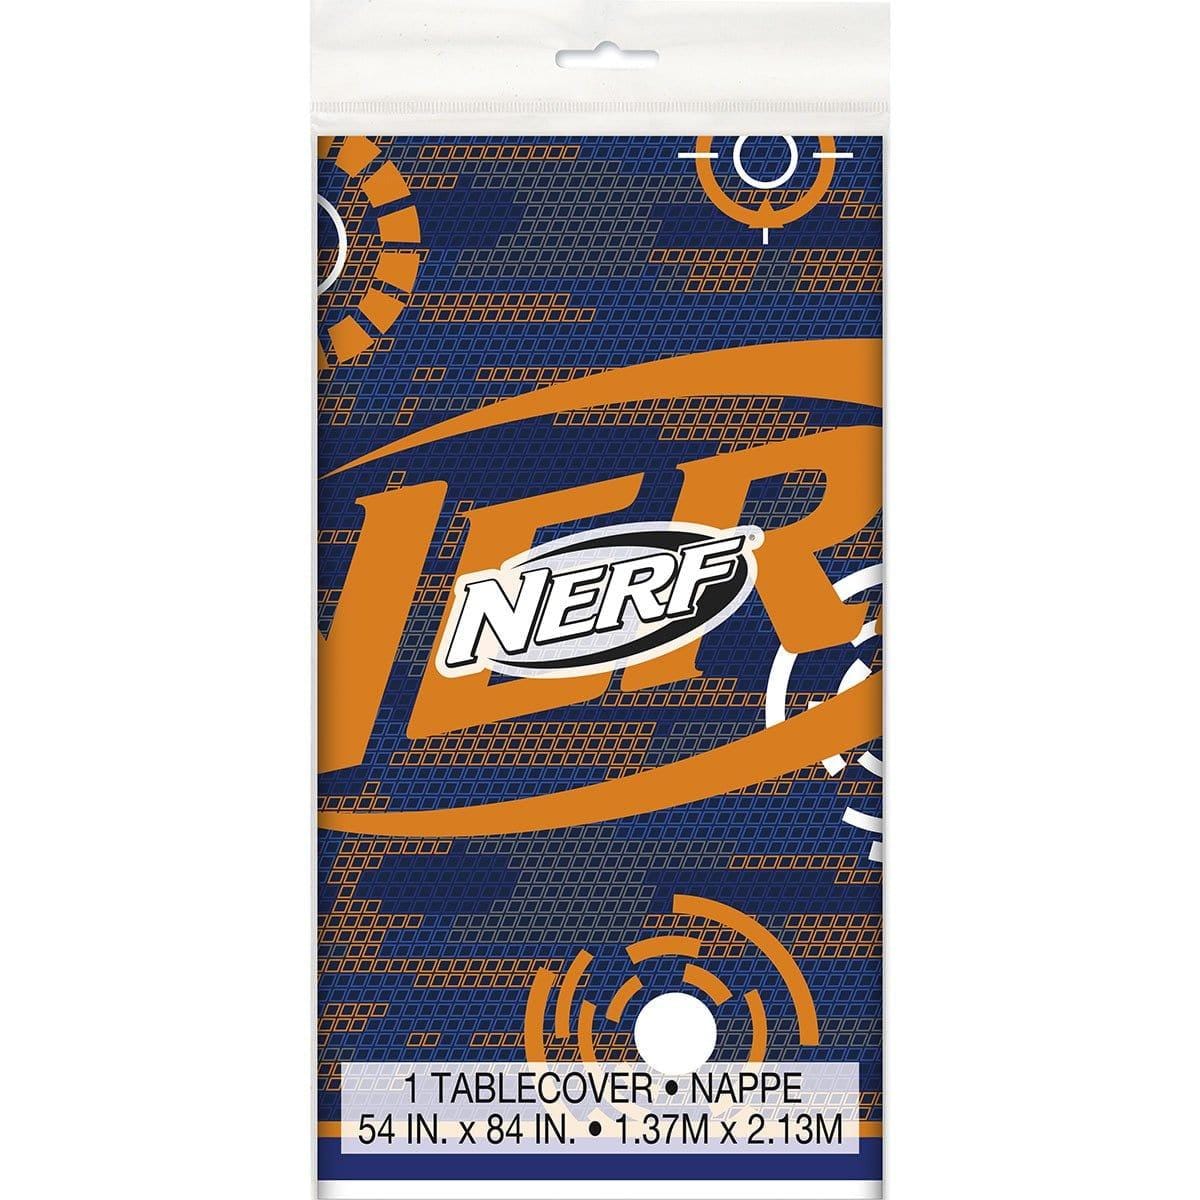 Buy Kids Birthday Nerf tablecover sold at Party Expert